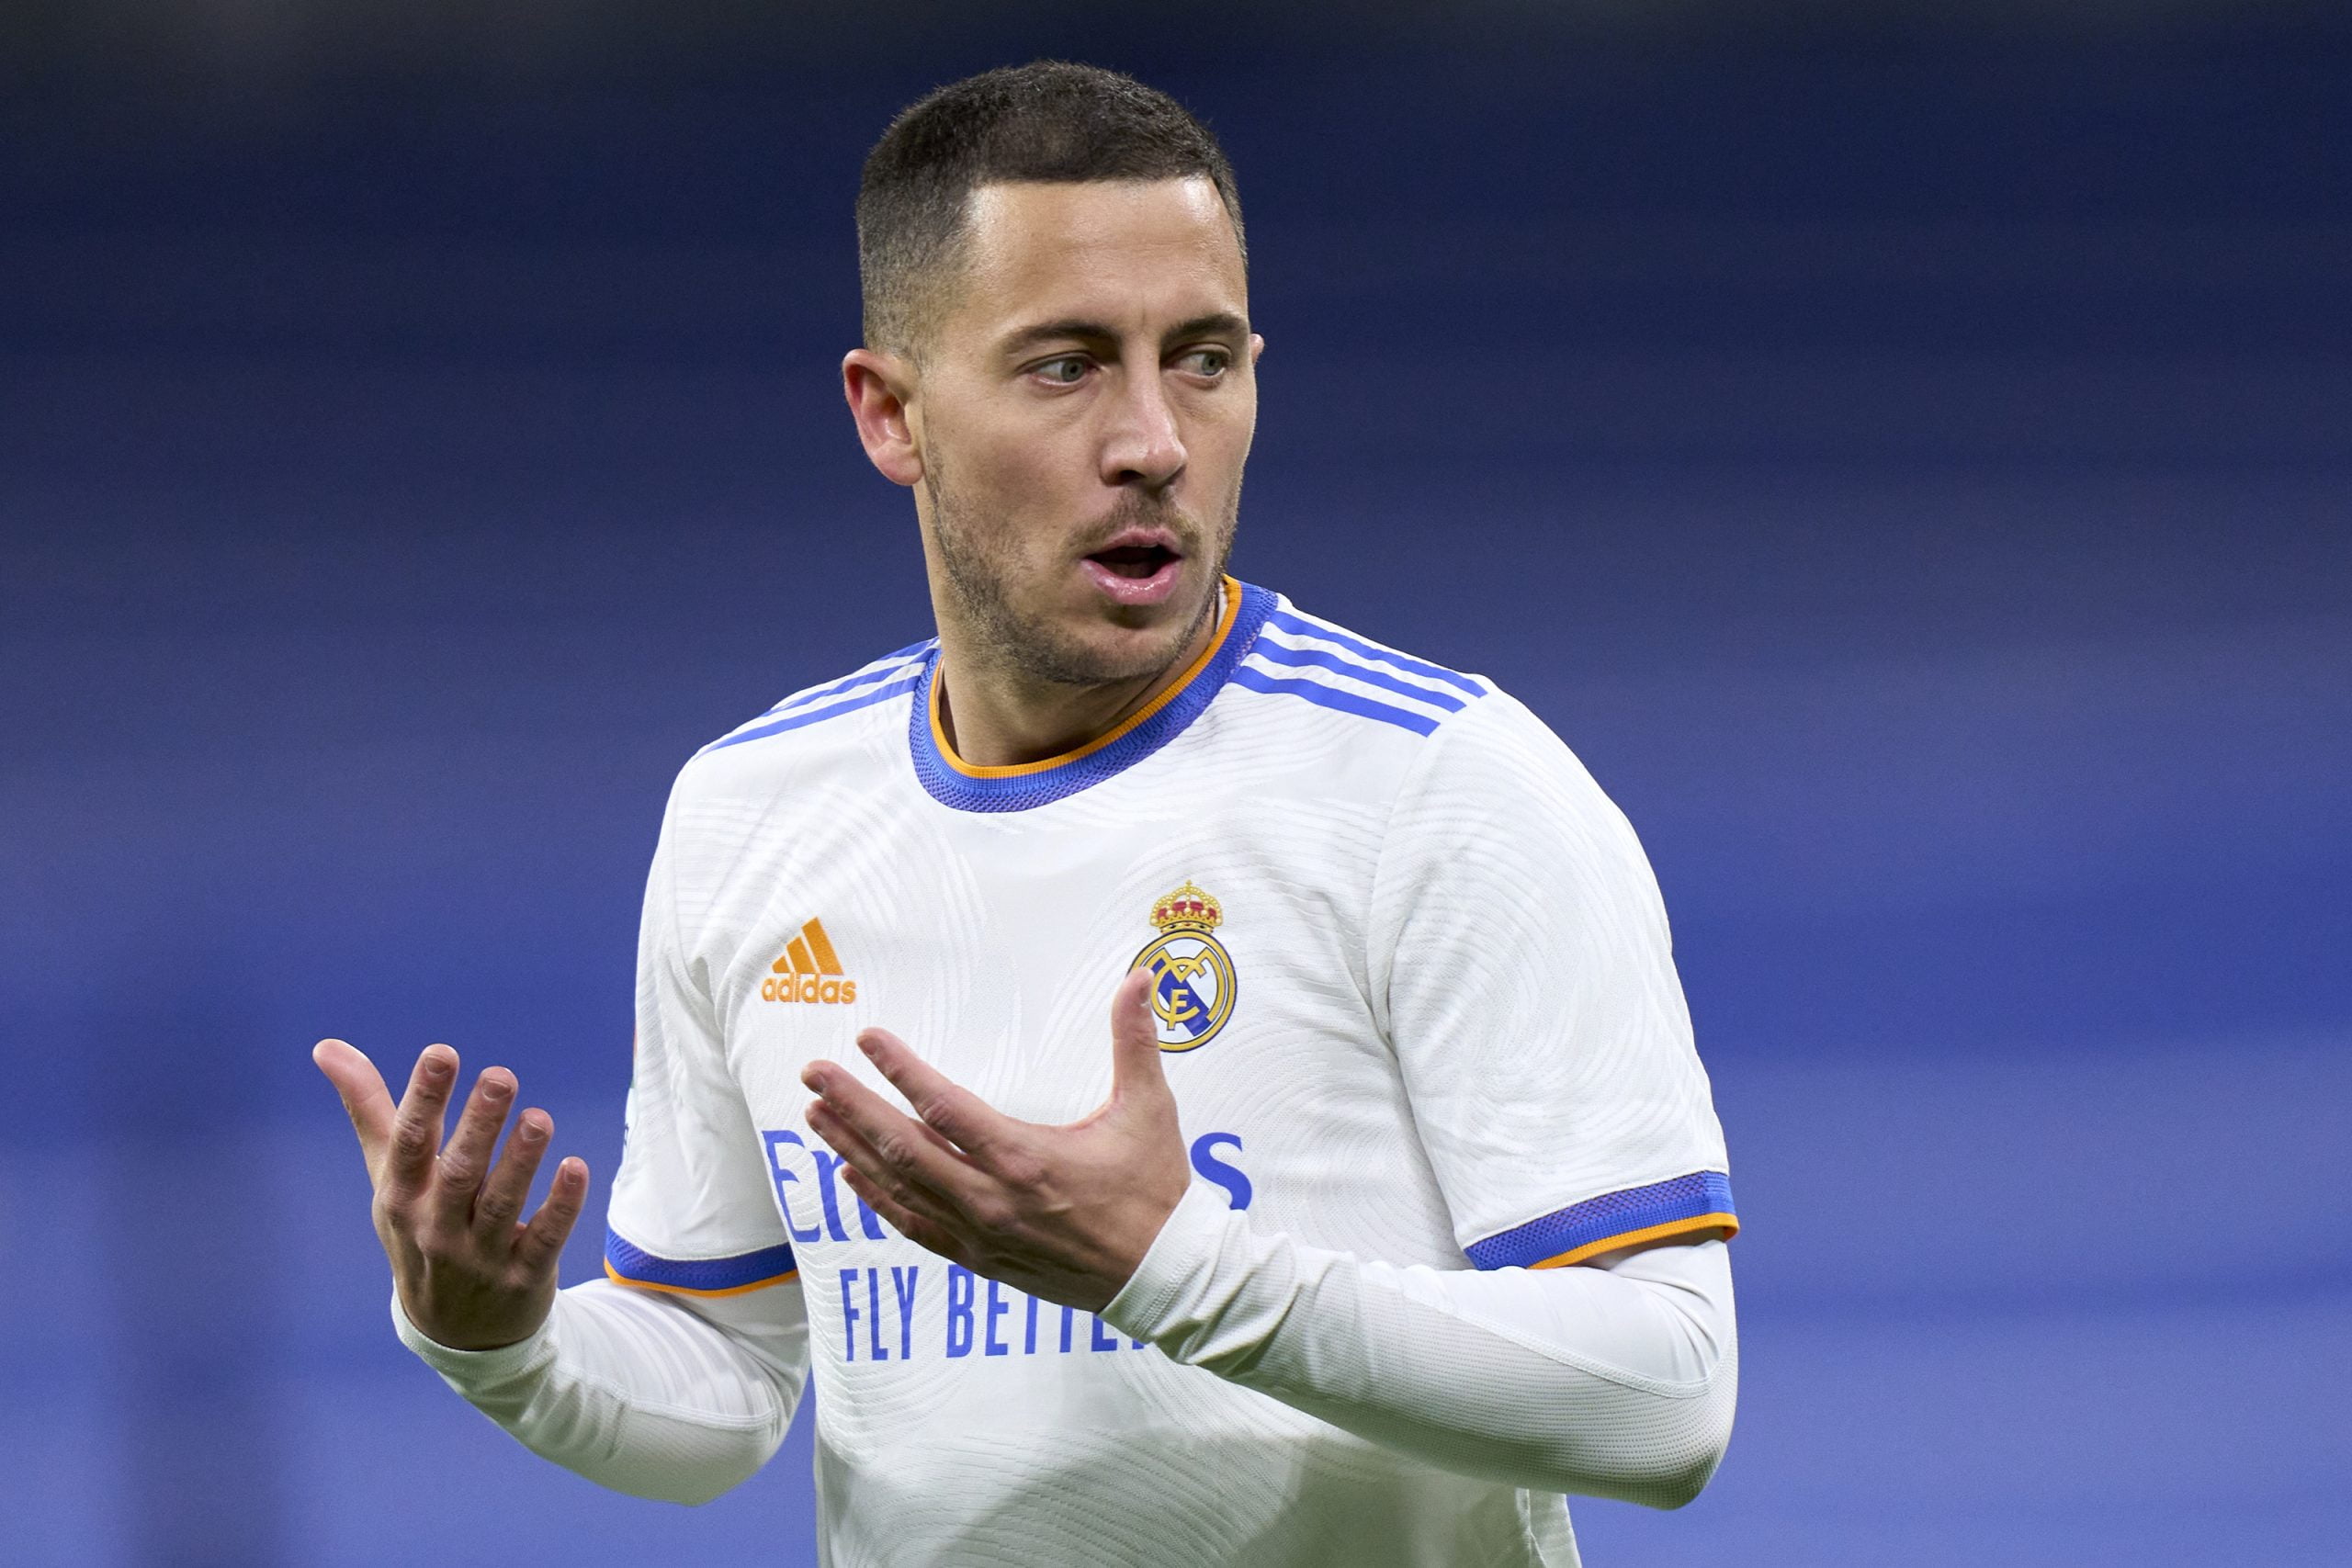 LaLiga: My situation at Real Madrid is delicate – Eden Hazard